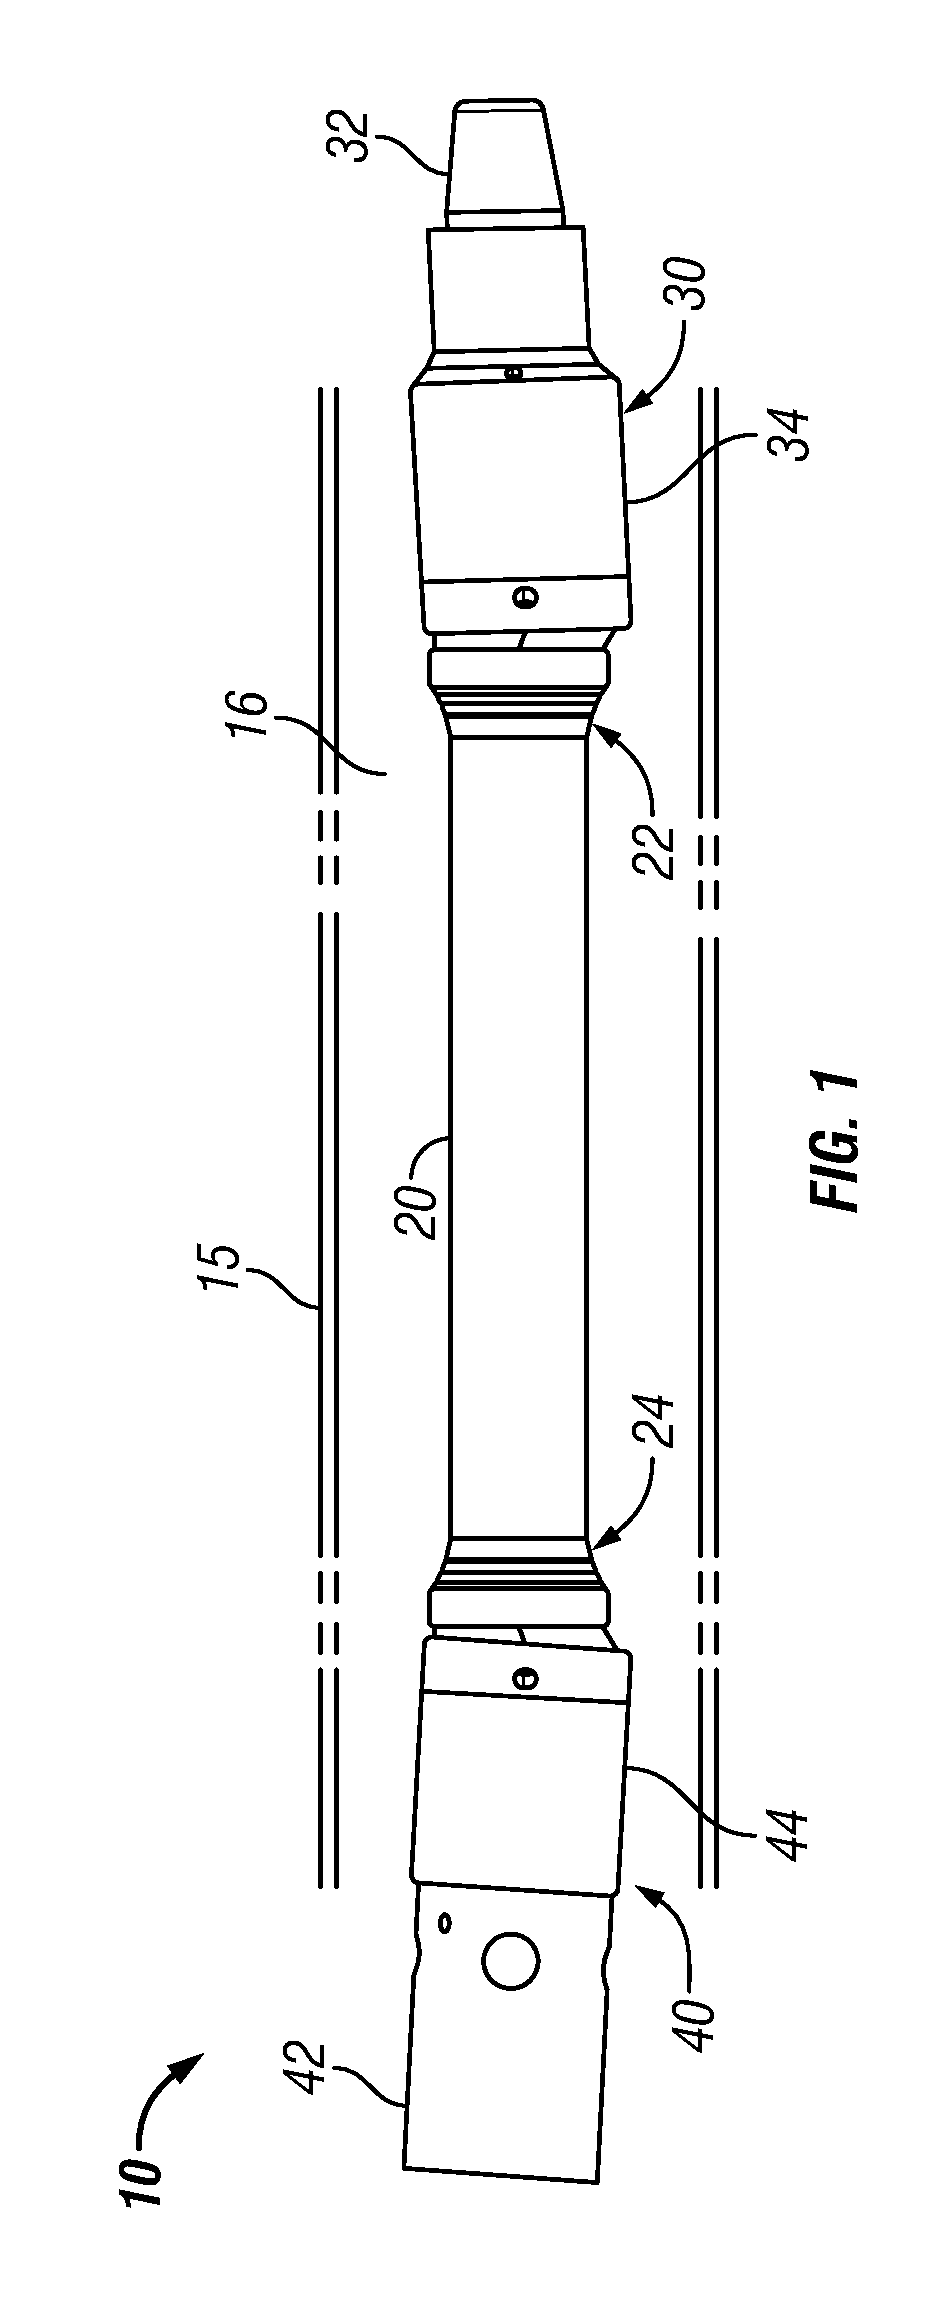 Drive shaft assembly for a downhole motor